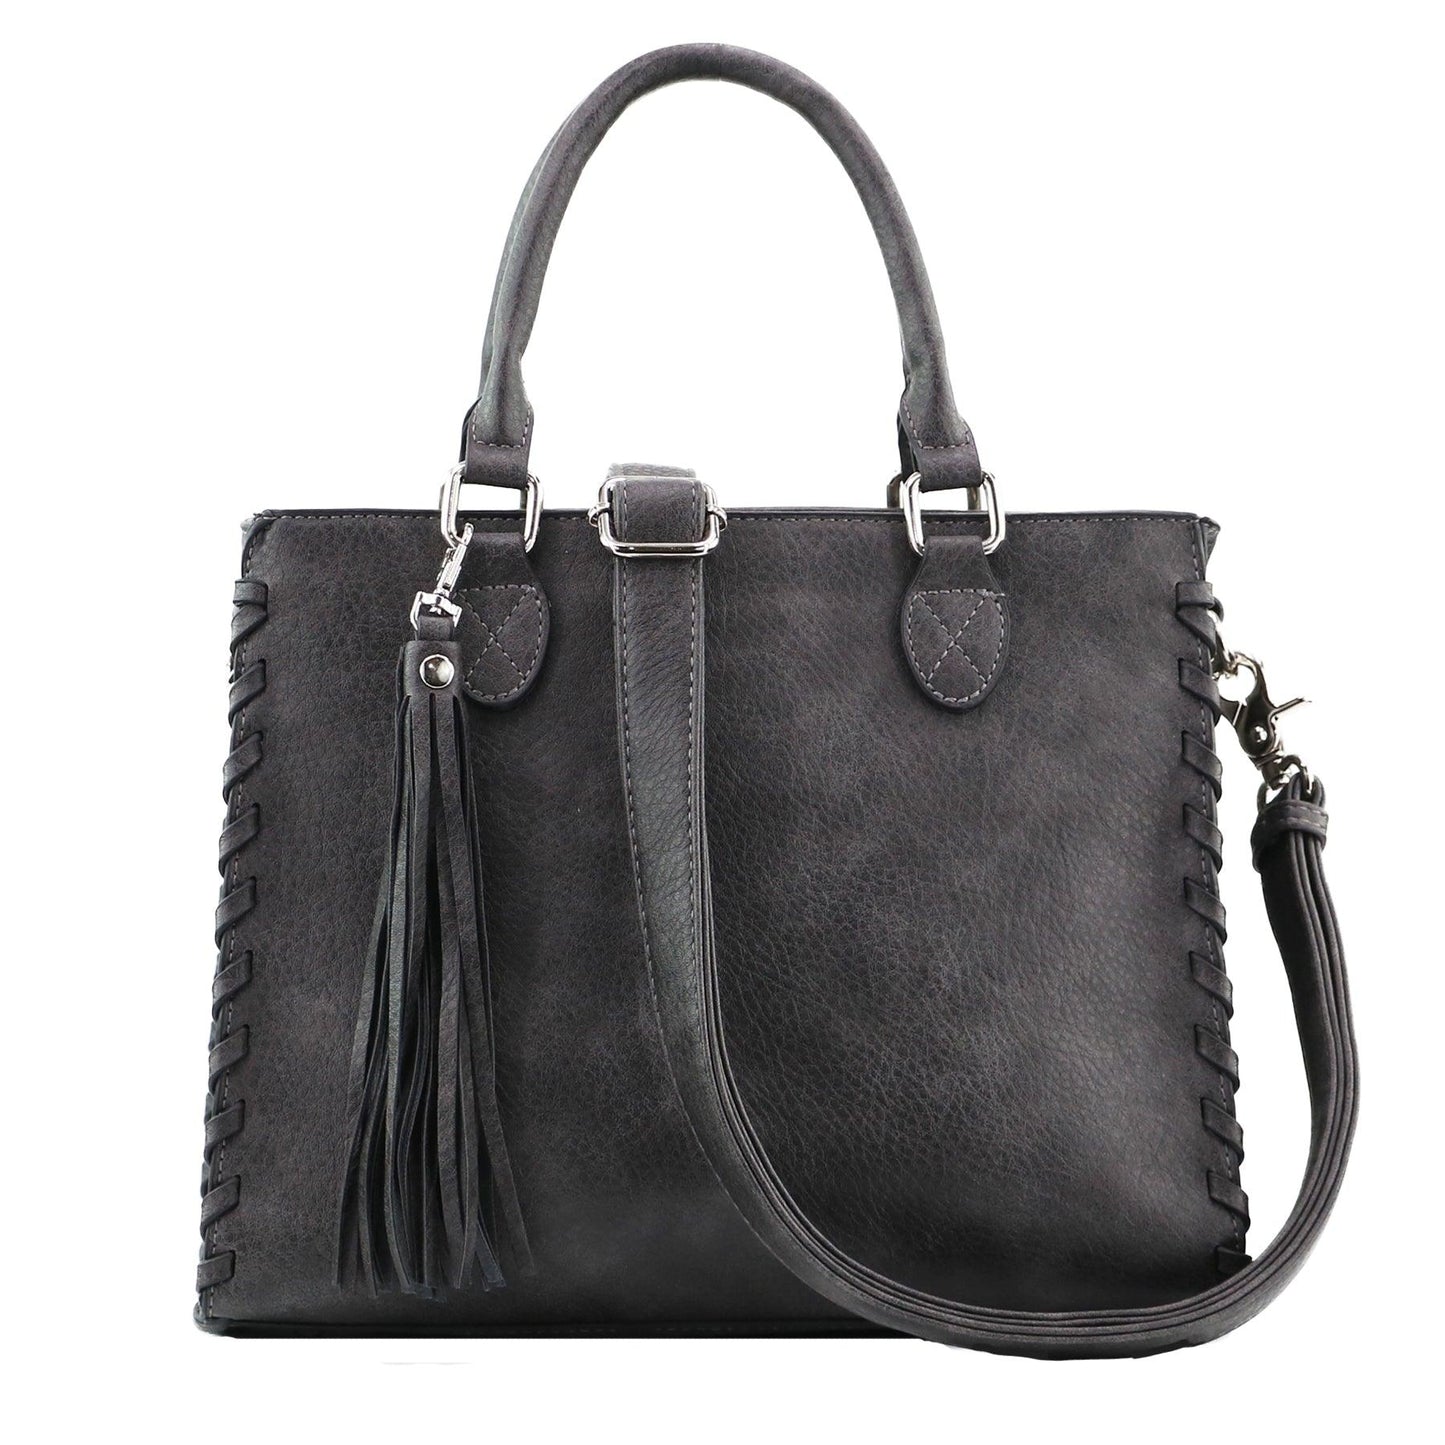 Lady Conceal Ann Satchel Gray